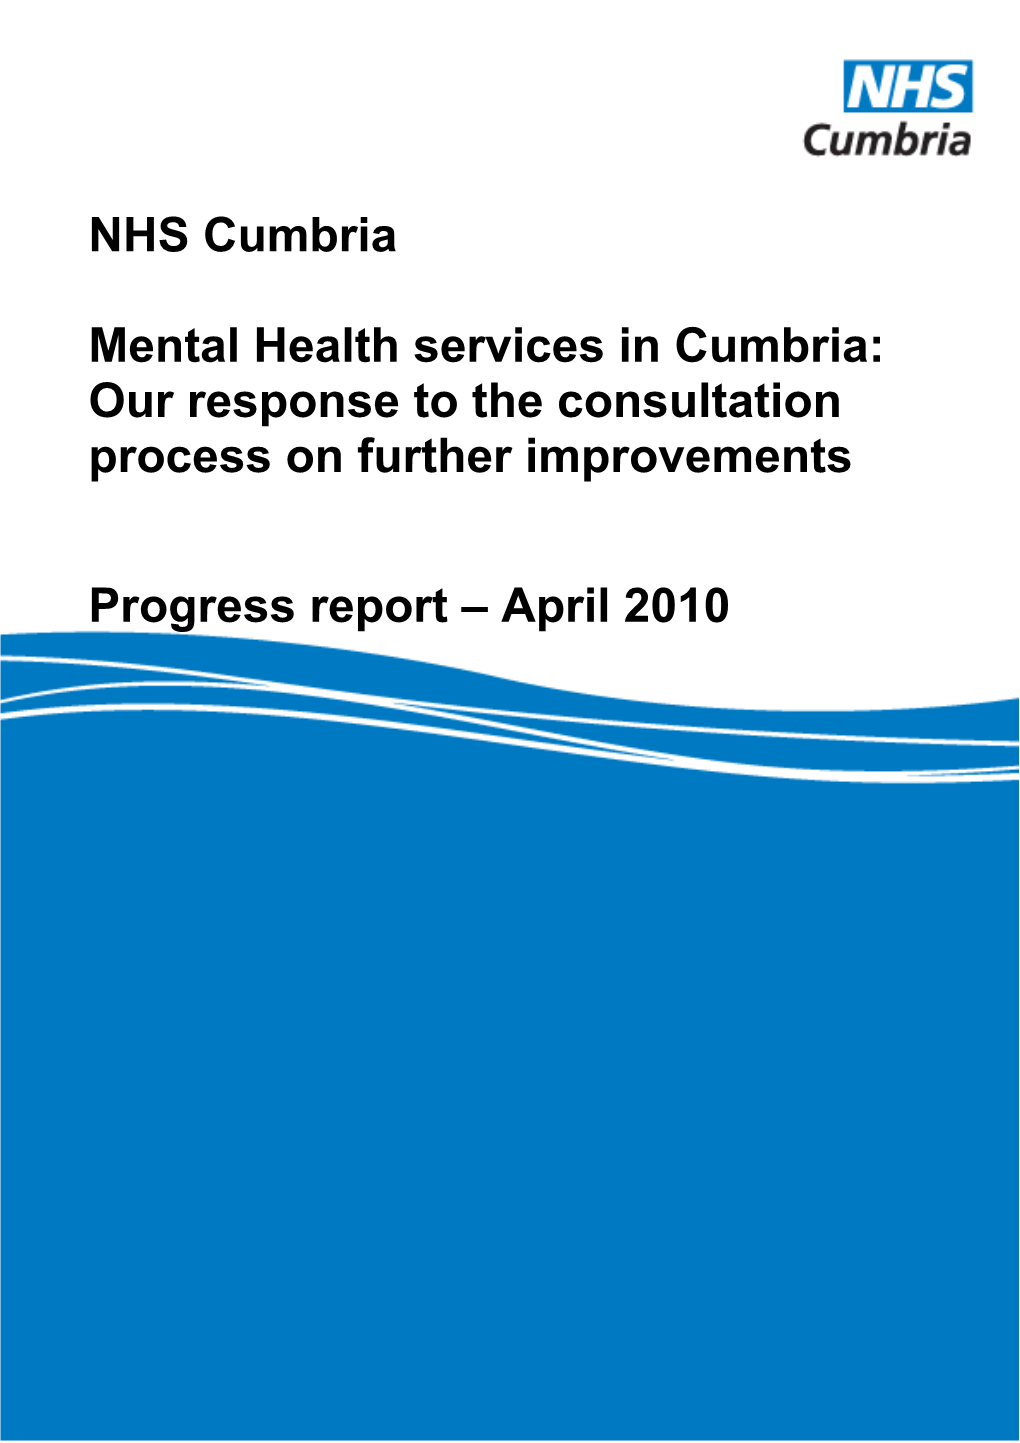 Mental Health Services in Cumbria: Our Response to the Consultation Process on Further